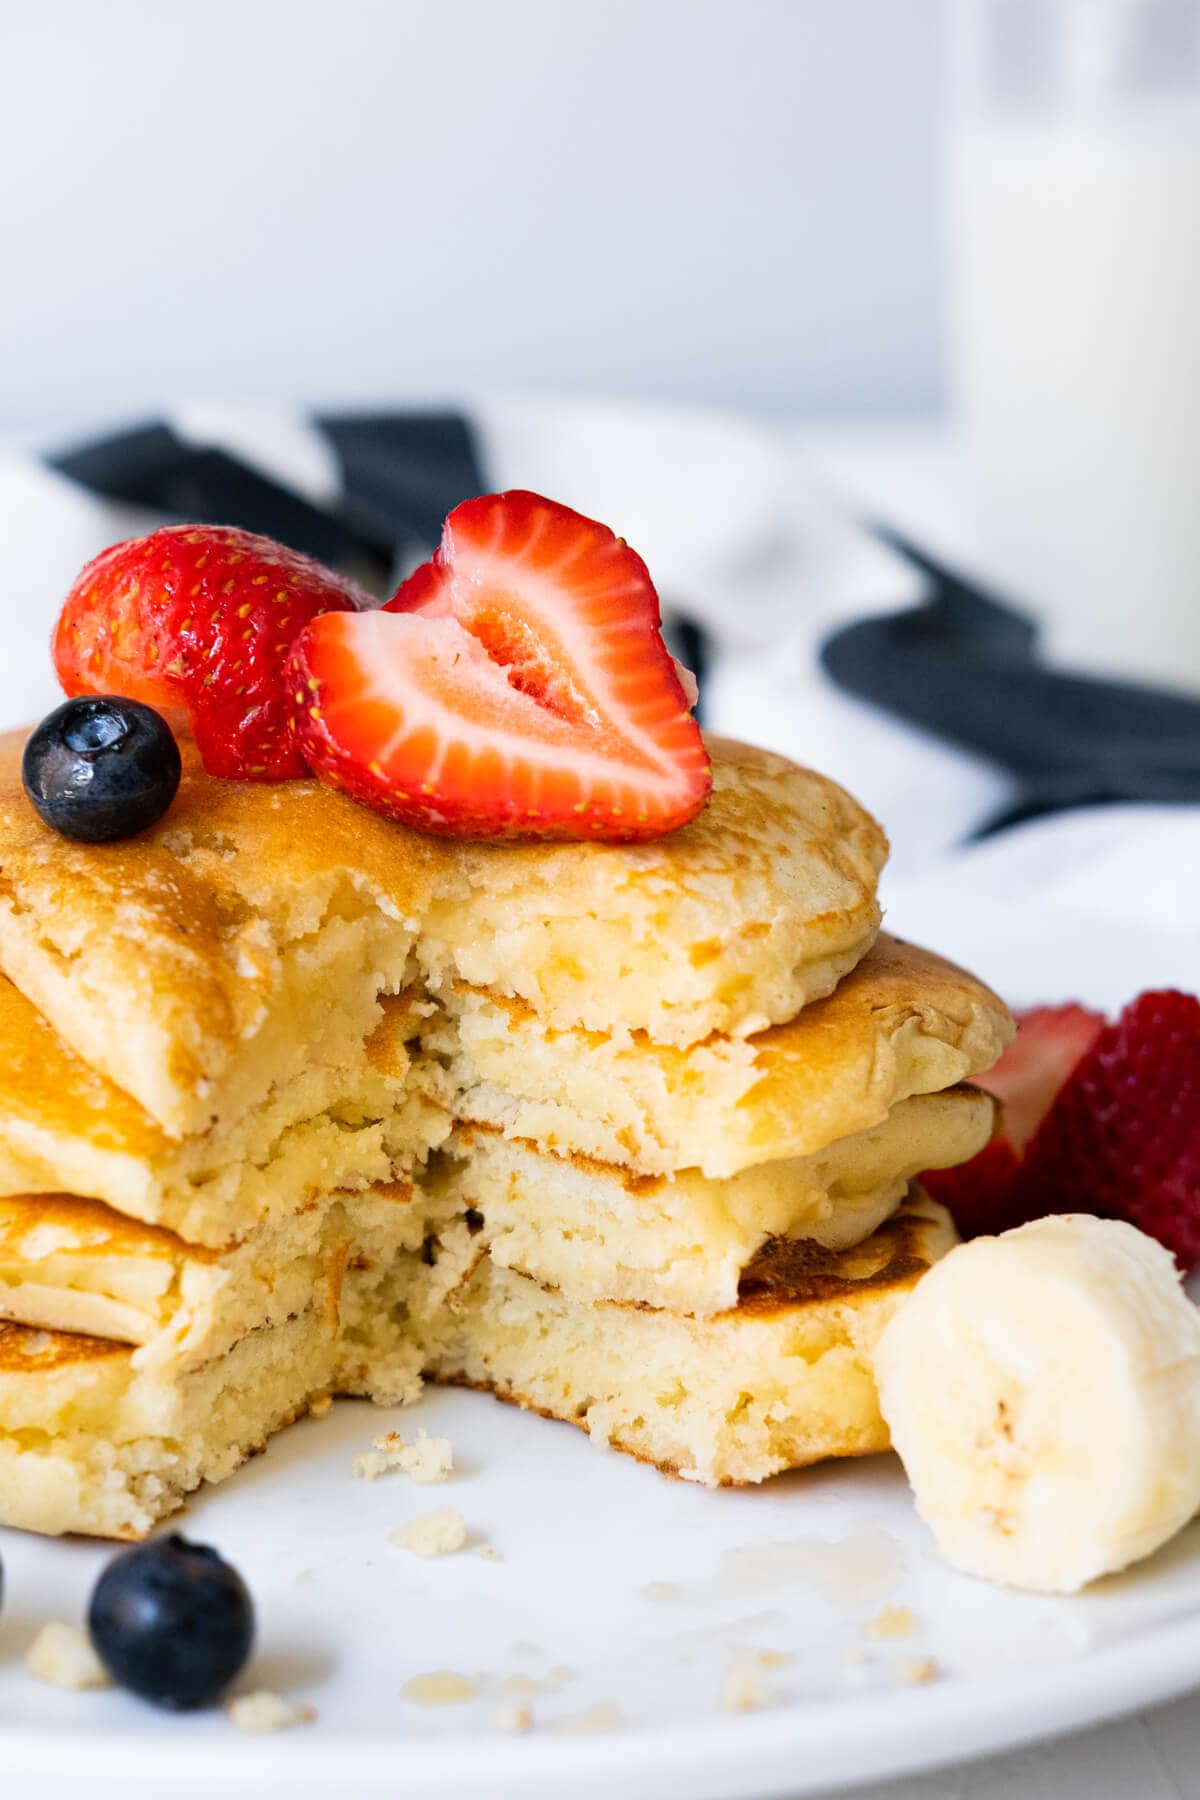 Pancakes stacked on each other with a cut in the center surrounded with strawberries, banana slices, and blueberries.